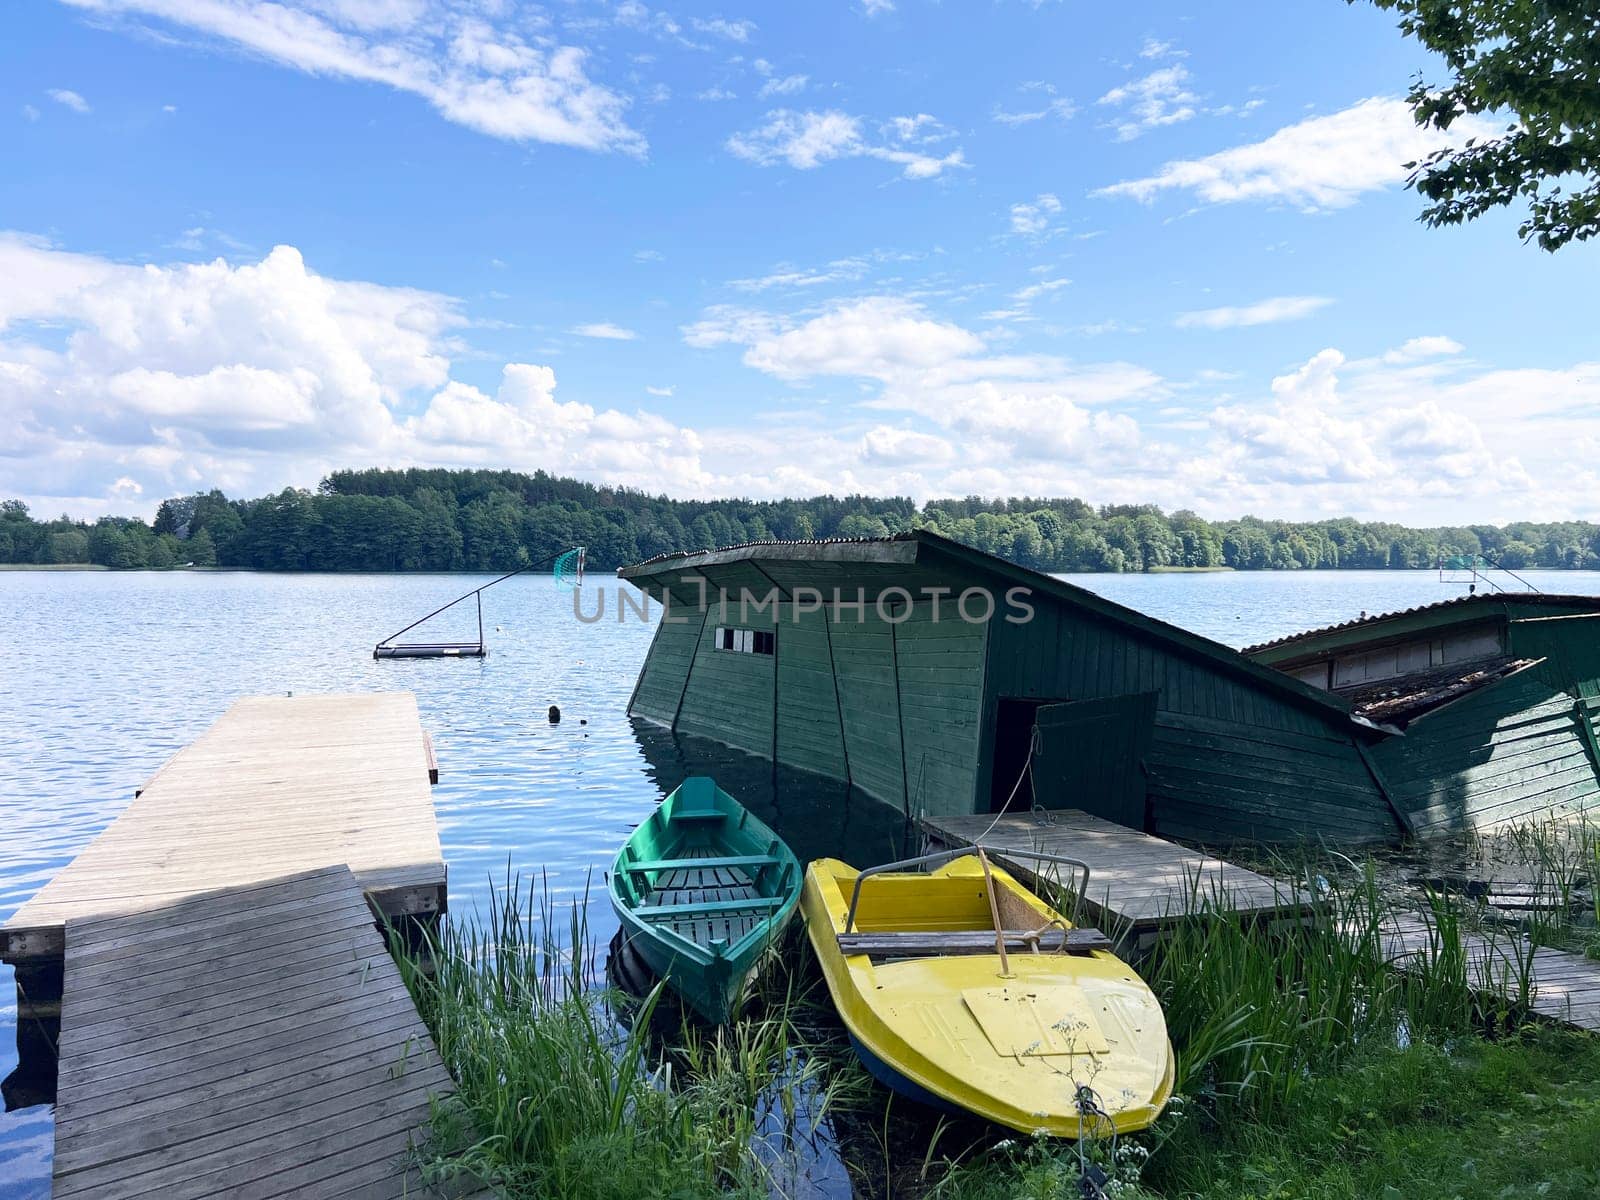 Ruined house in the lake after storm some boats near in Trakai, Lithuania. High quality photo